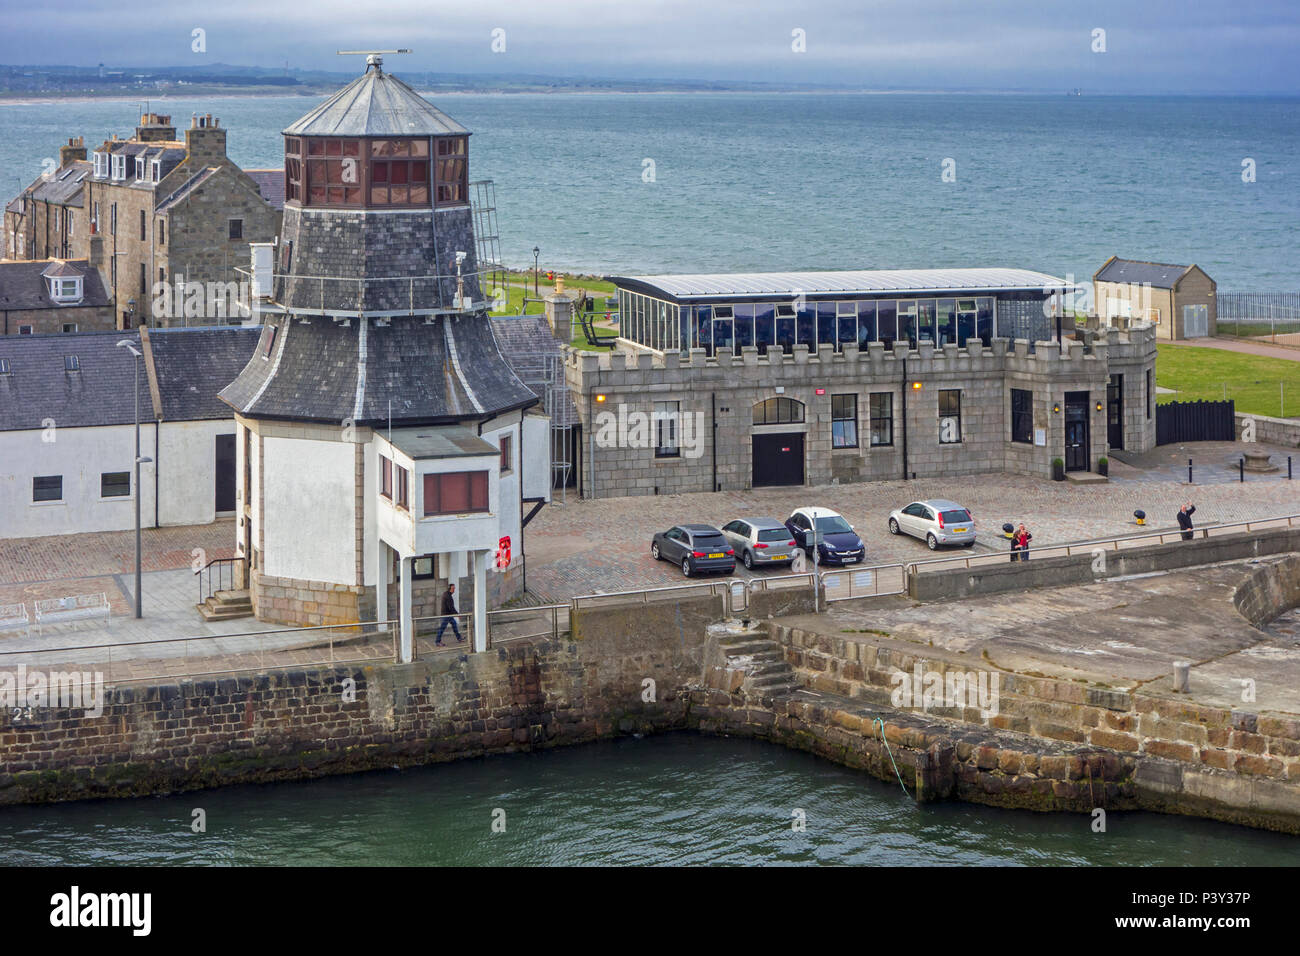 The old harbour master's control tower at entrance to the Aberdeen port, Aberdeenshire, Scotland, UK Stock Photo